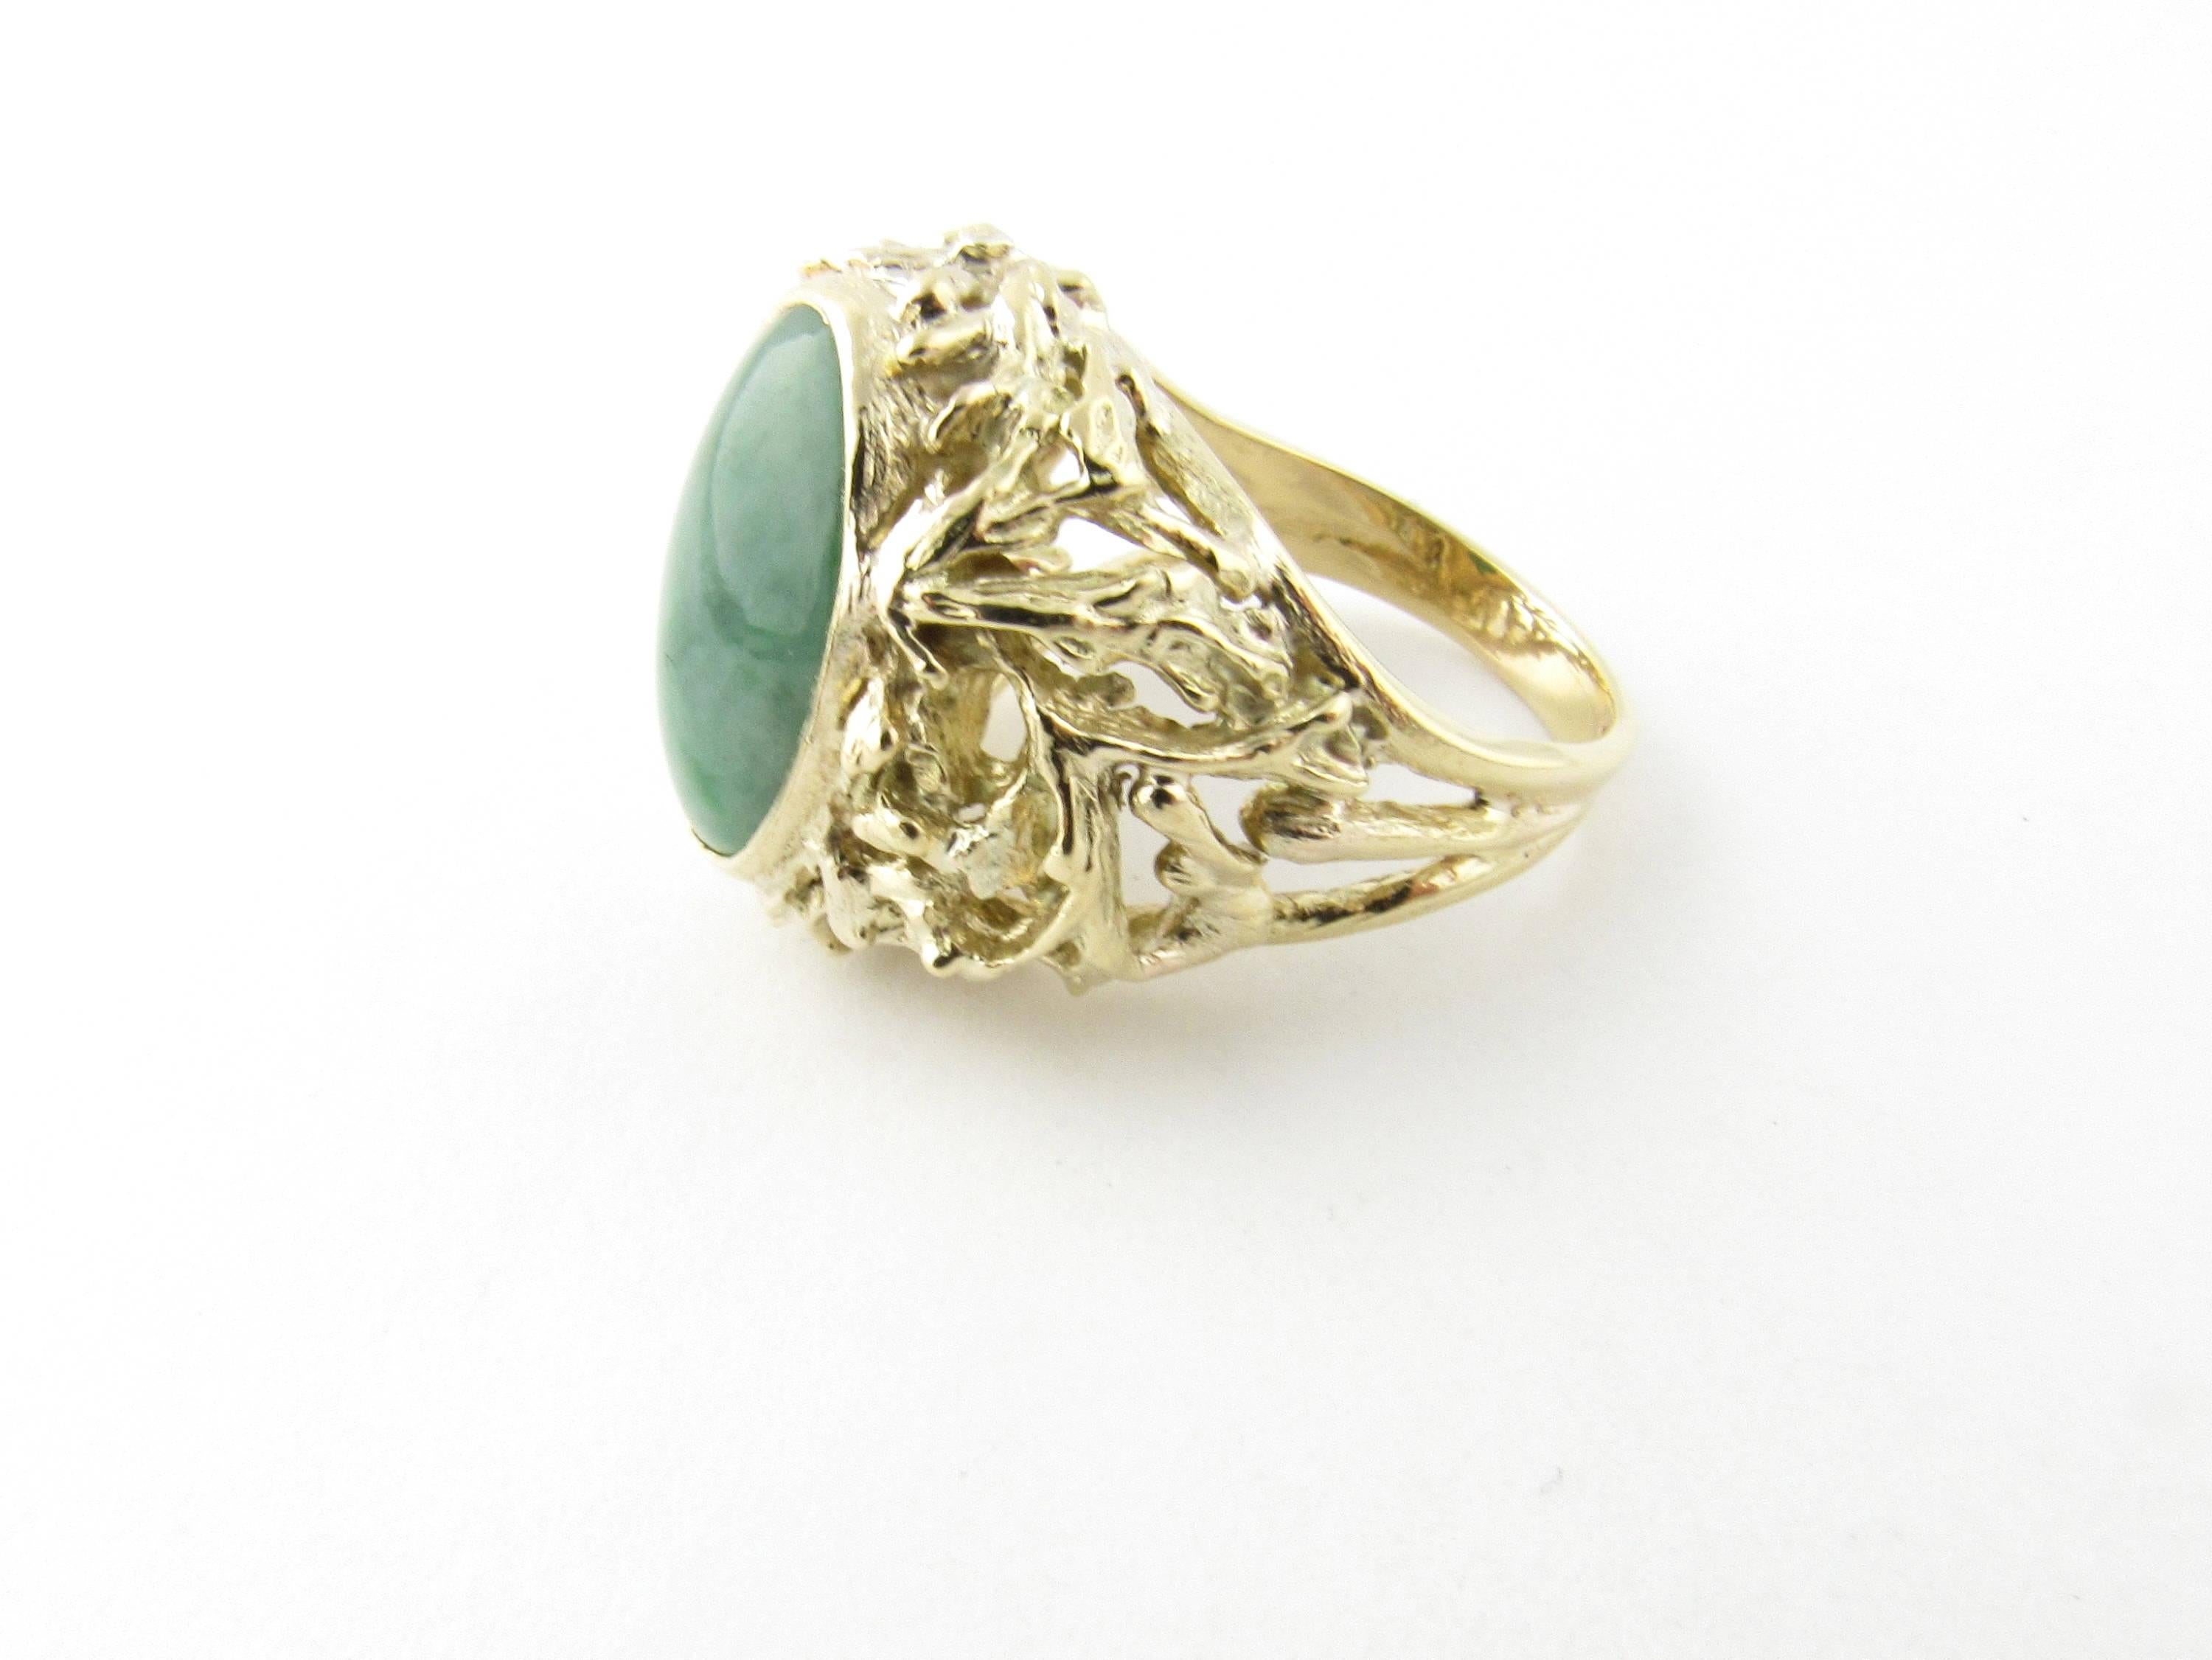 Vintage 14 Karat Yellow Gold Genuine Jade Ring Size 7-

This lovely ring features one genuine oval jade stone (17 mm x 12 mm) set in beautifully detailed 14K yellow gold. Shank measures 3 mm.

Ring Size: 7

Weight: 7.8 dwt. / 12.2 gr.

Hallmark: